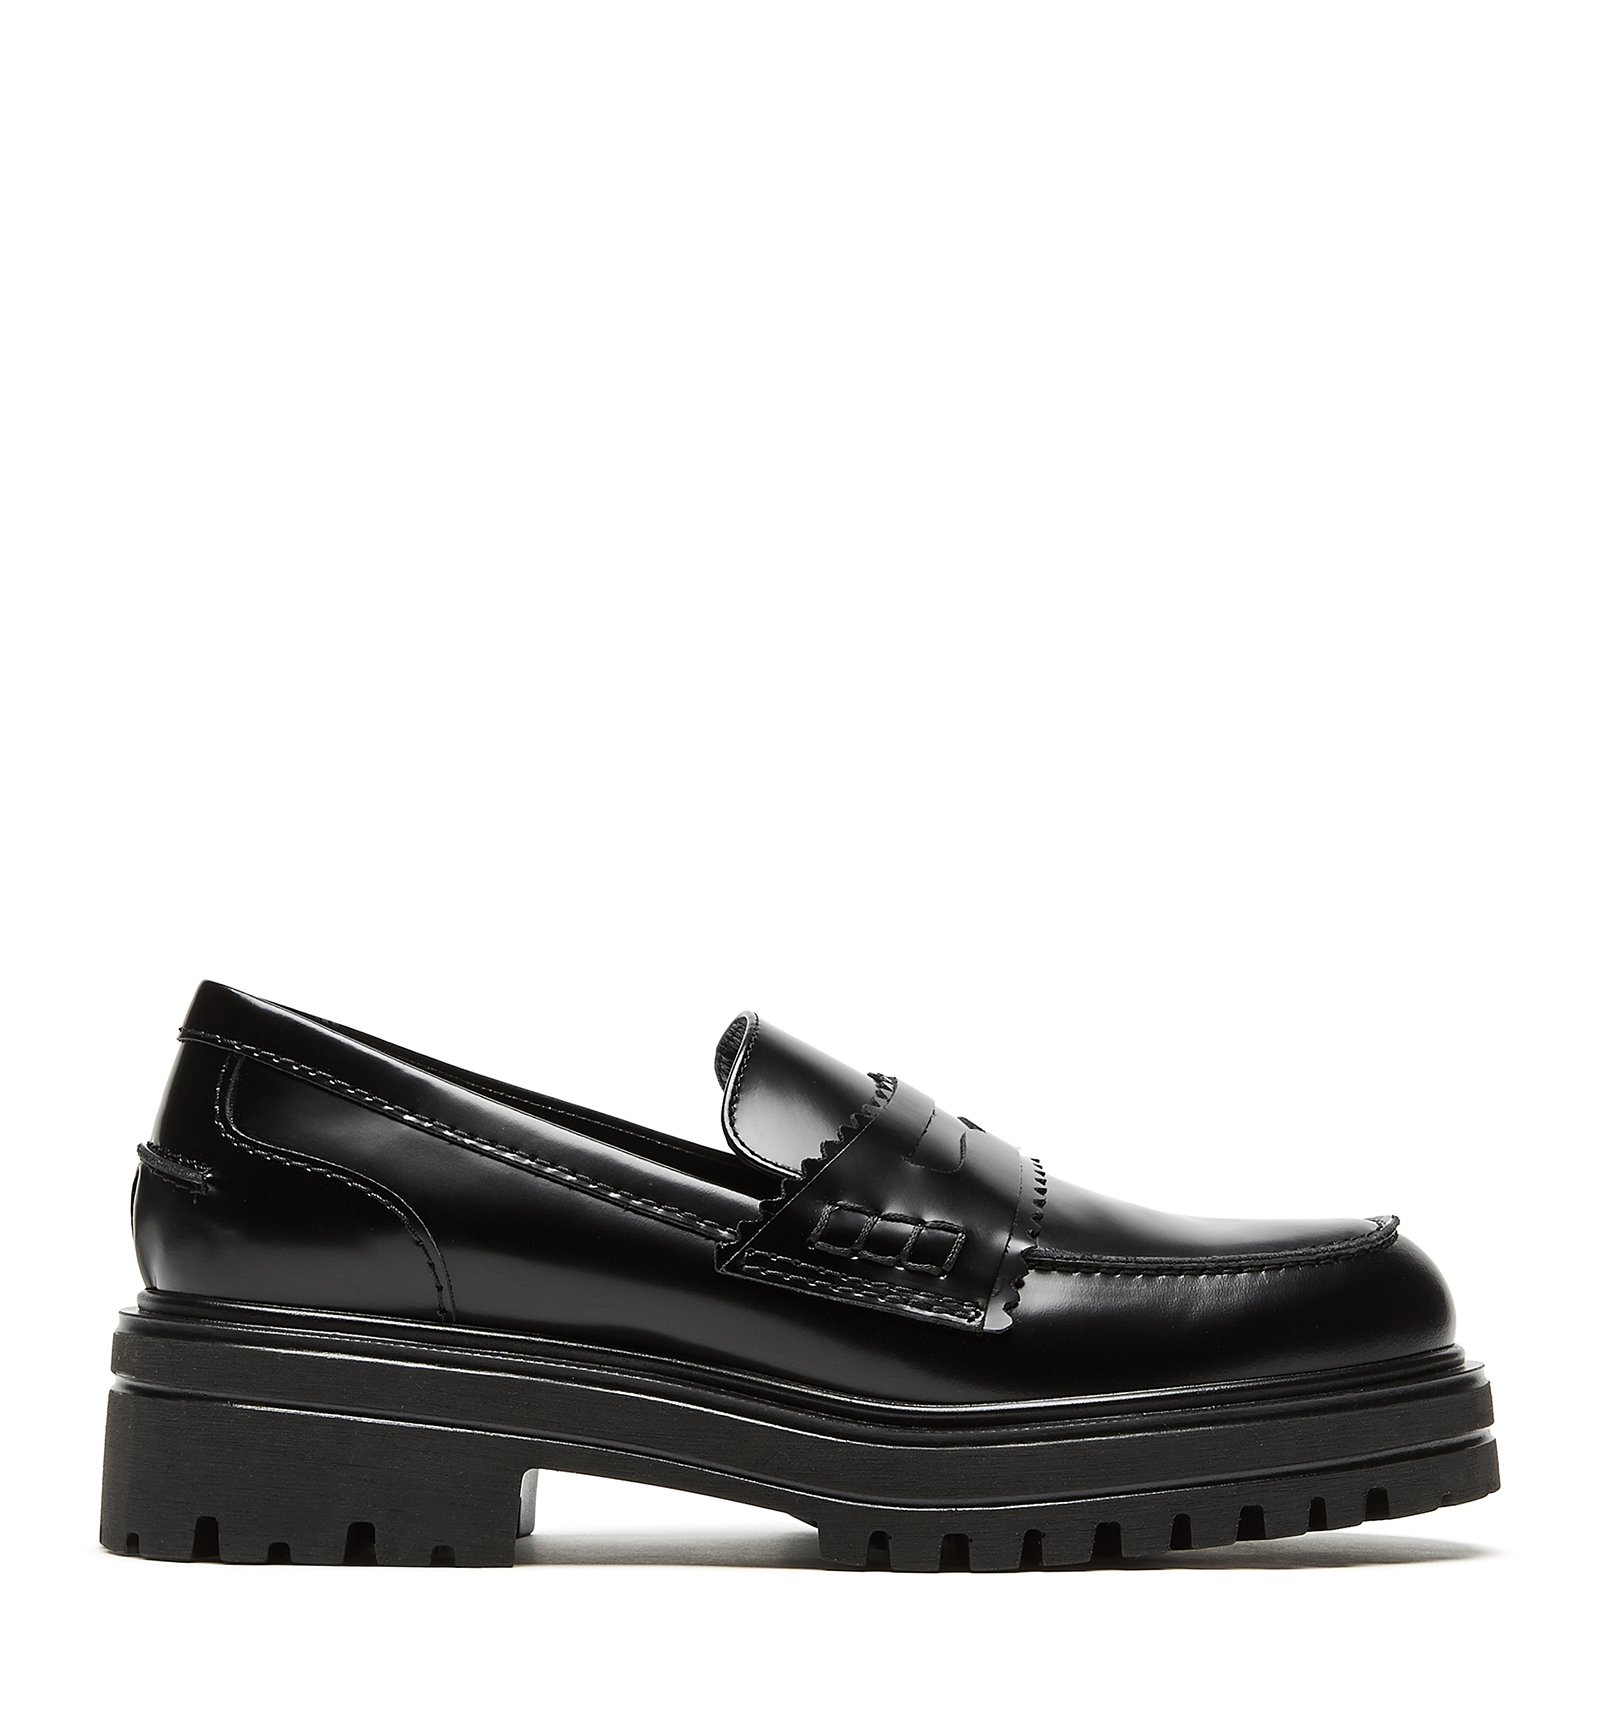 La Canadienne Rescale Patent Leather Loafer In Black